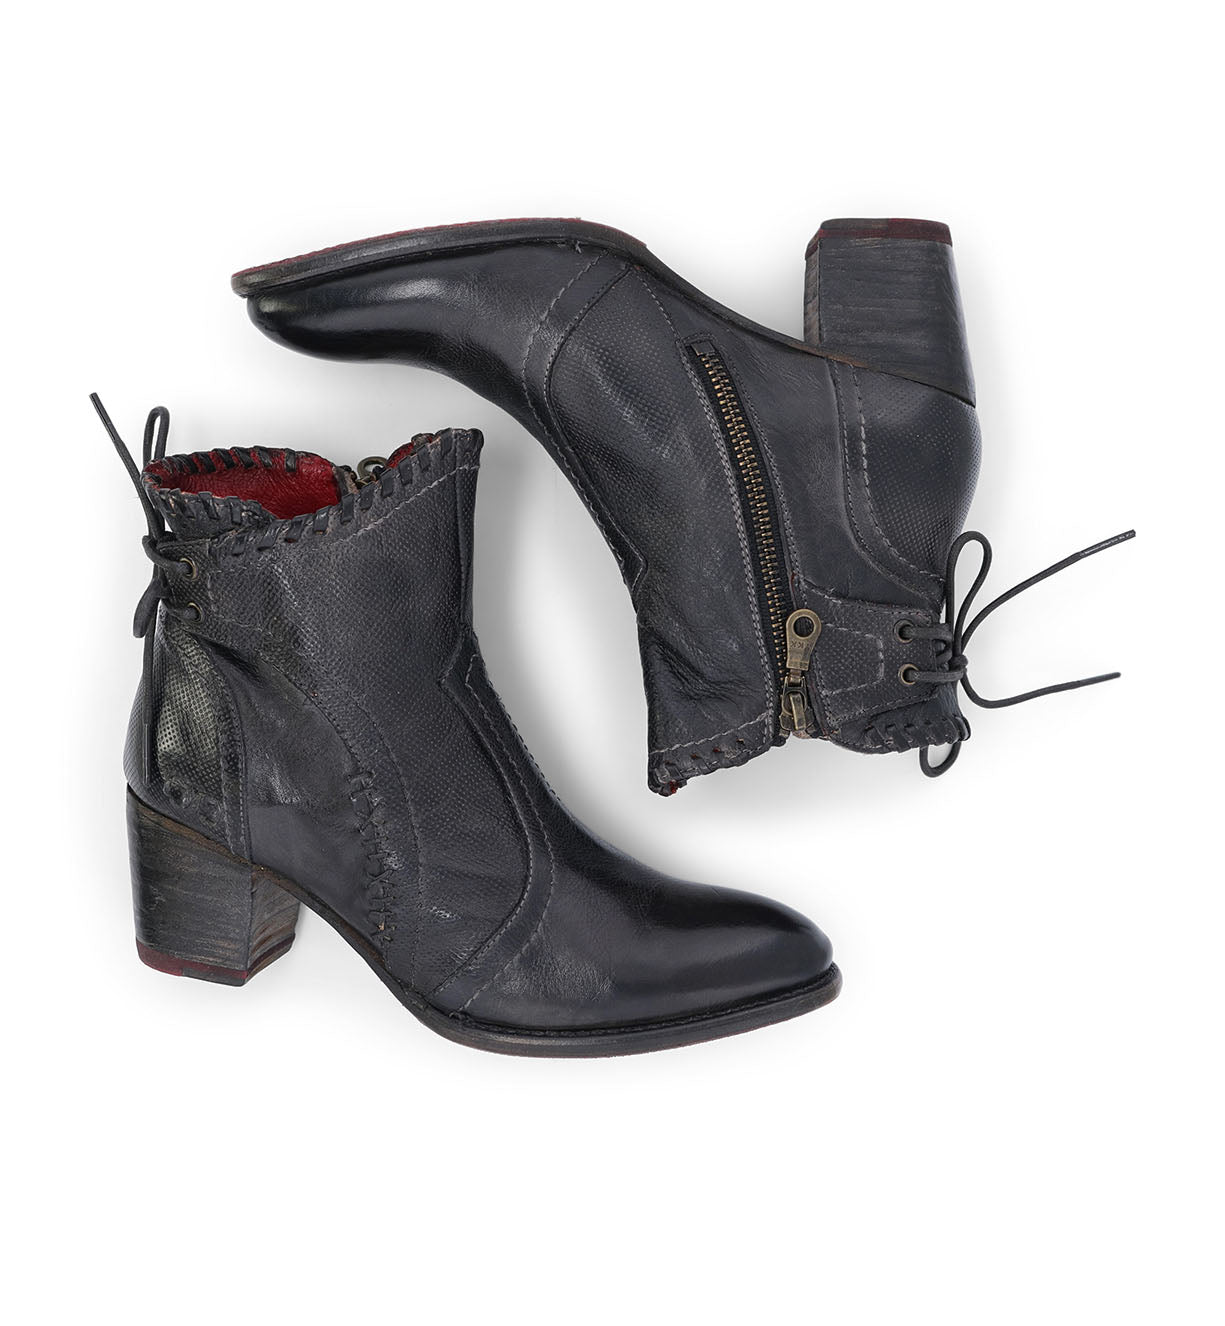 A pair of Bia black leather ankle boots with red detailing from Bed Stu.